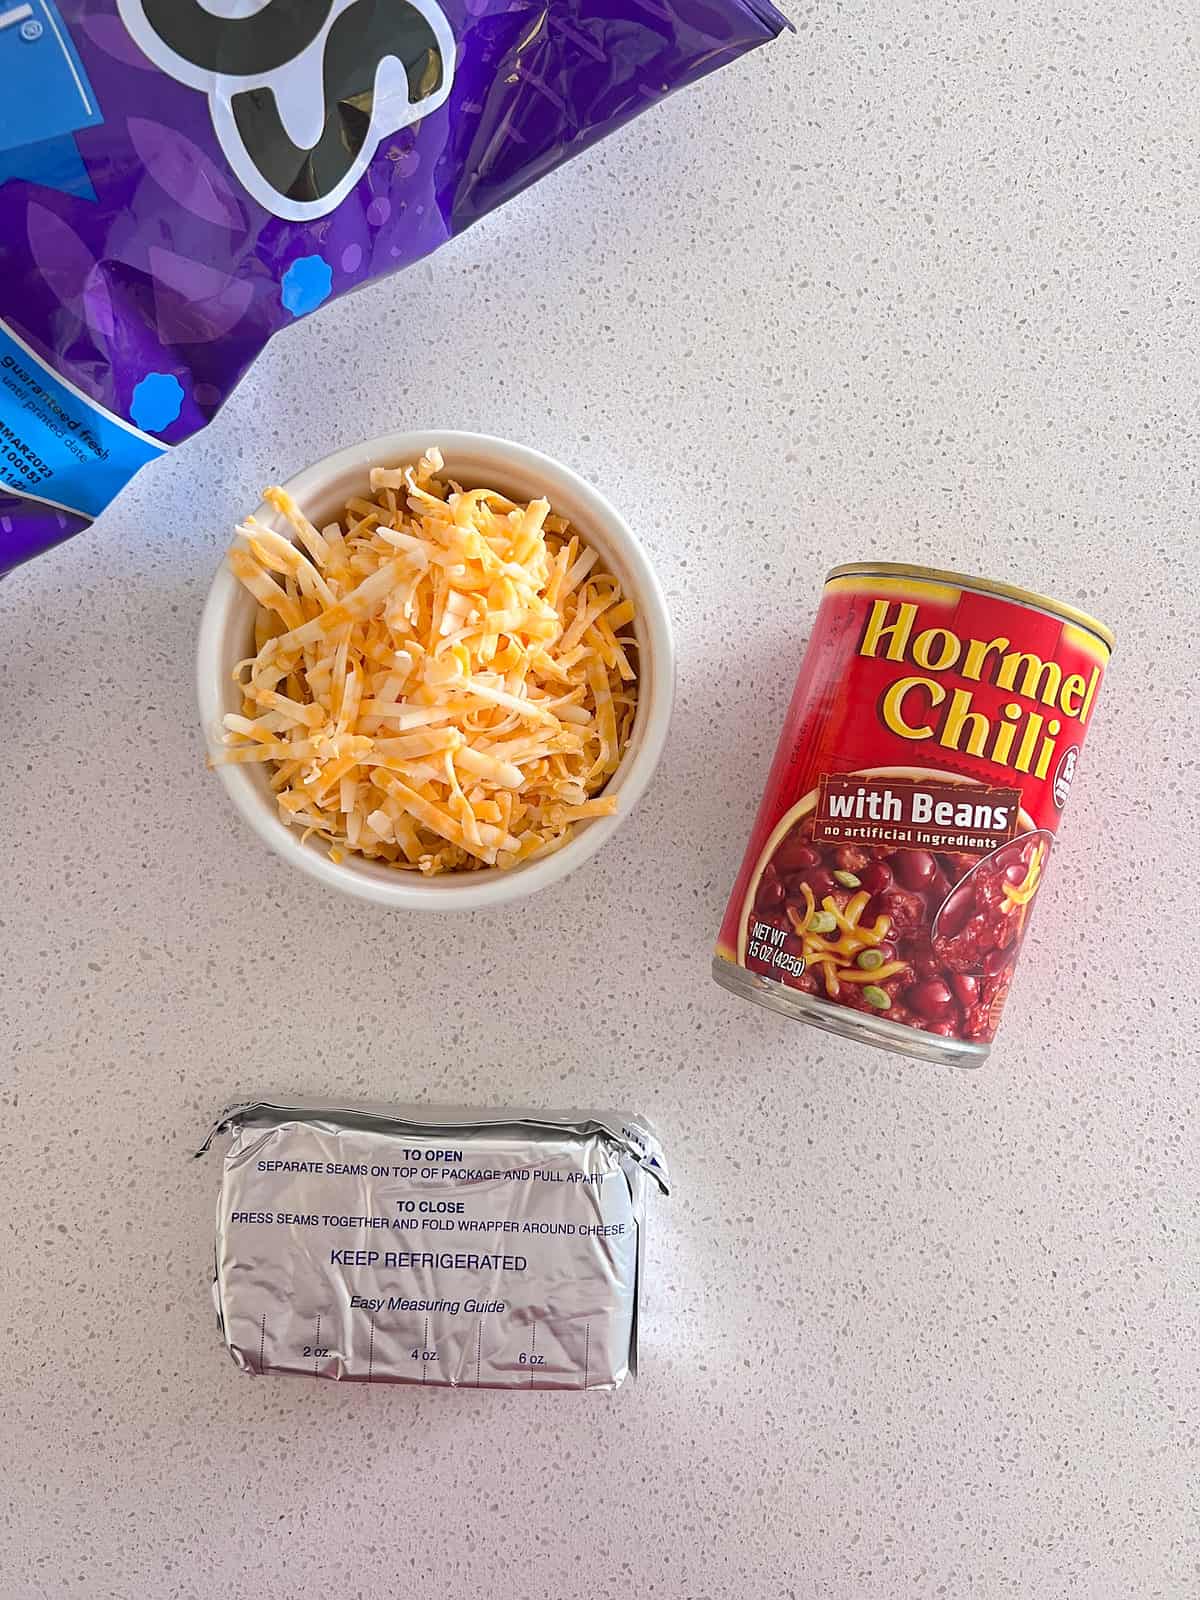 Can of Hormel chili dip with beans, cream cheese, and cheddar cheese omn table.